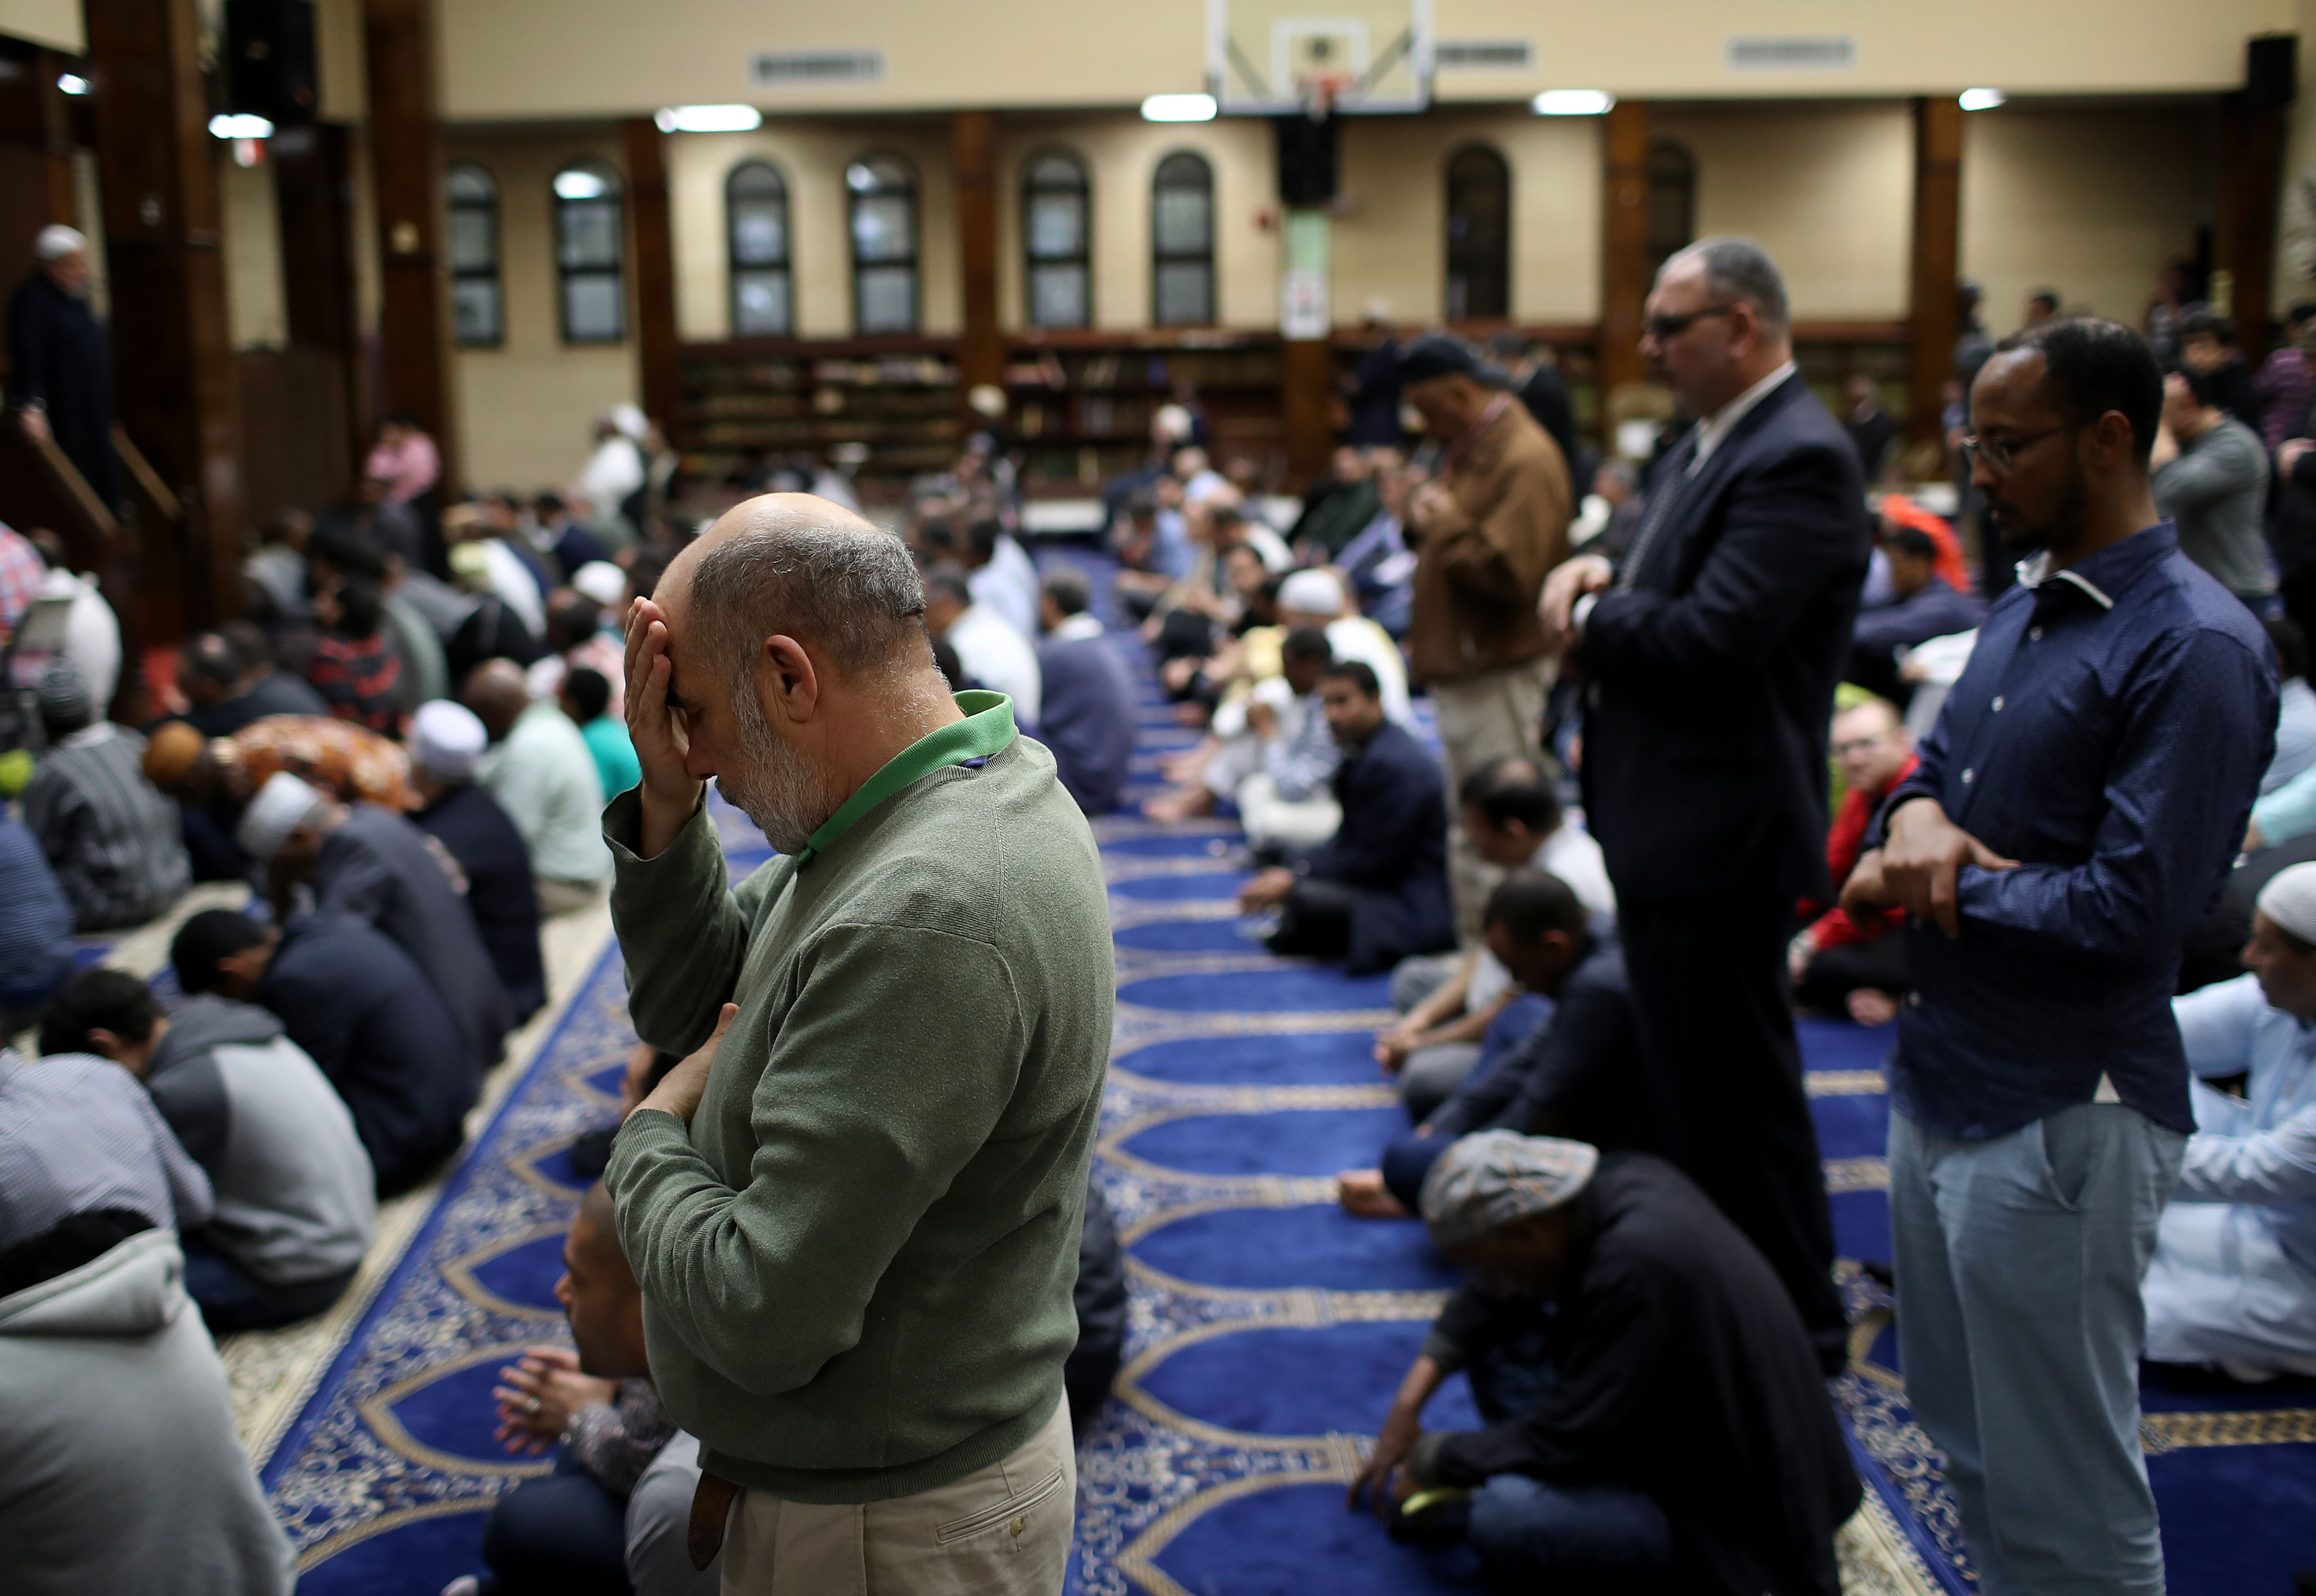 Muslim Americans take part in Friday prayers at the Dar Al Hijrah Islamic Center March 15, 2019 in Falls Church, Virginia. 49 people were killed in a terror attack at a mosque in Christchurch, New Zealand. (Photo by Win McNamee/Getty Images)